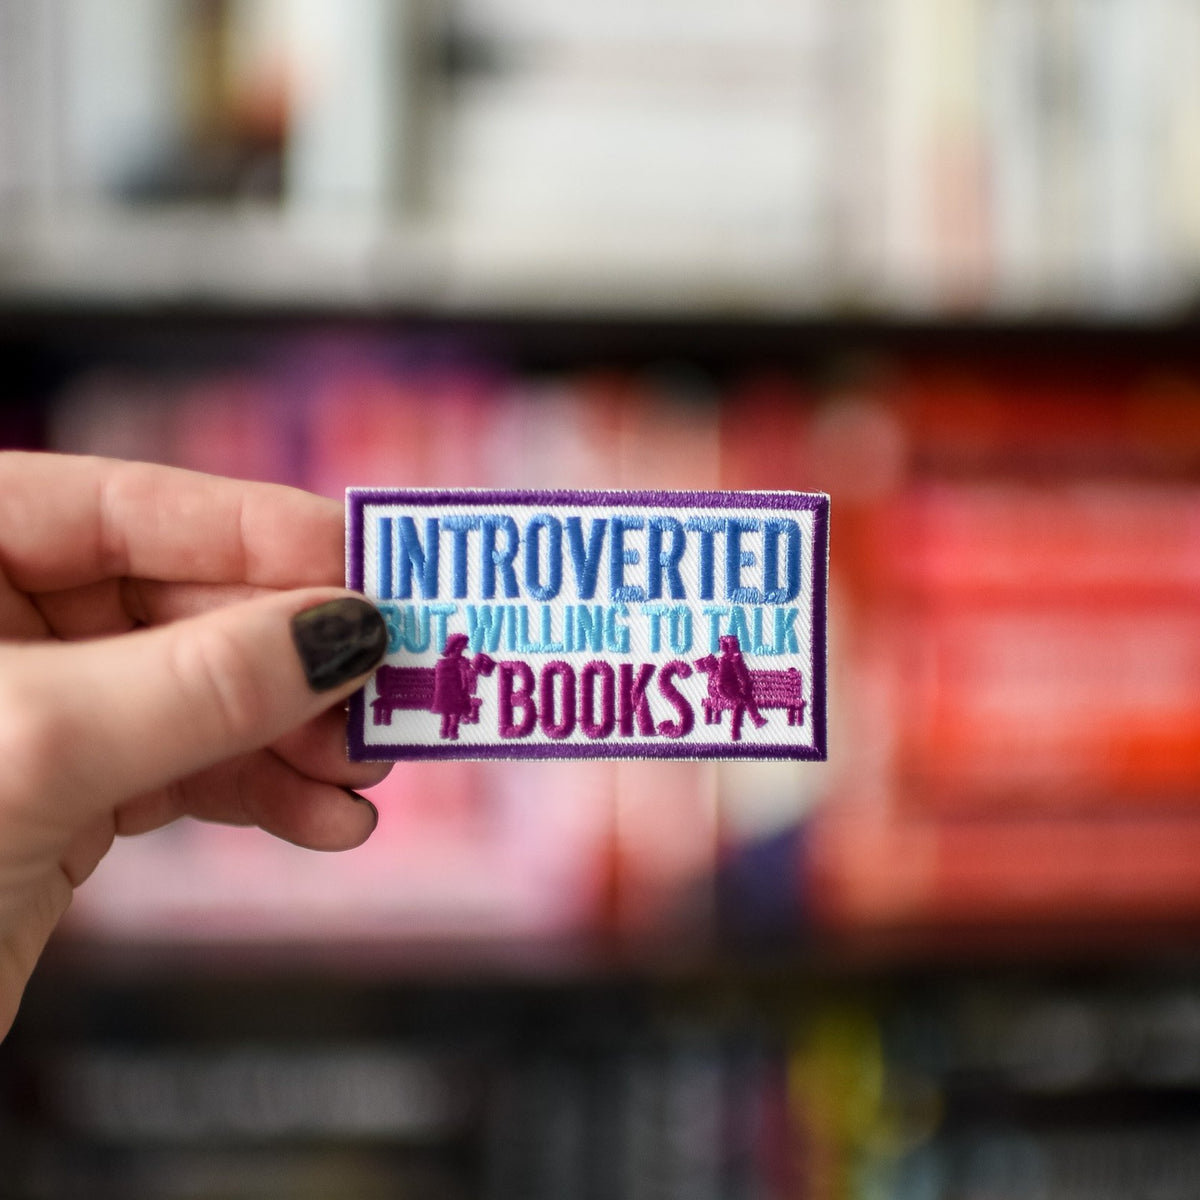 Introvert But Willing to Talk about Books Patch with benches and two people holding books